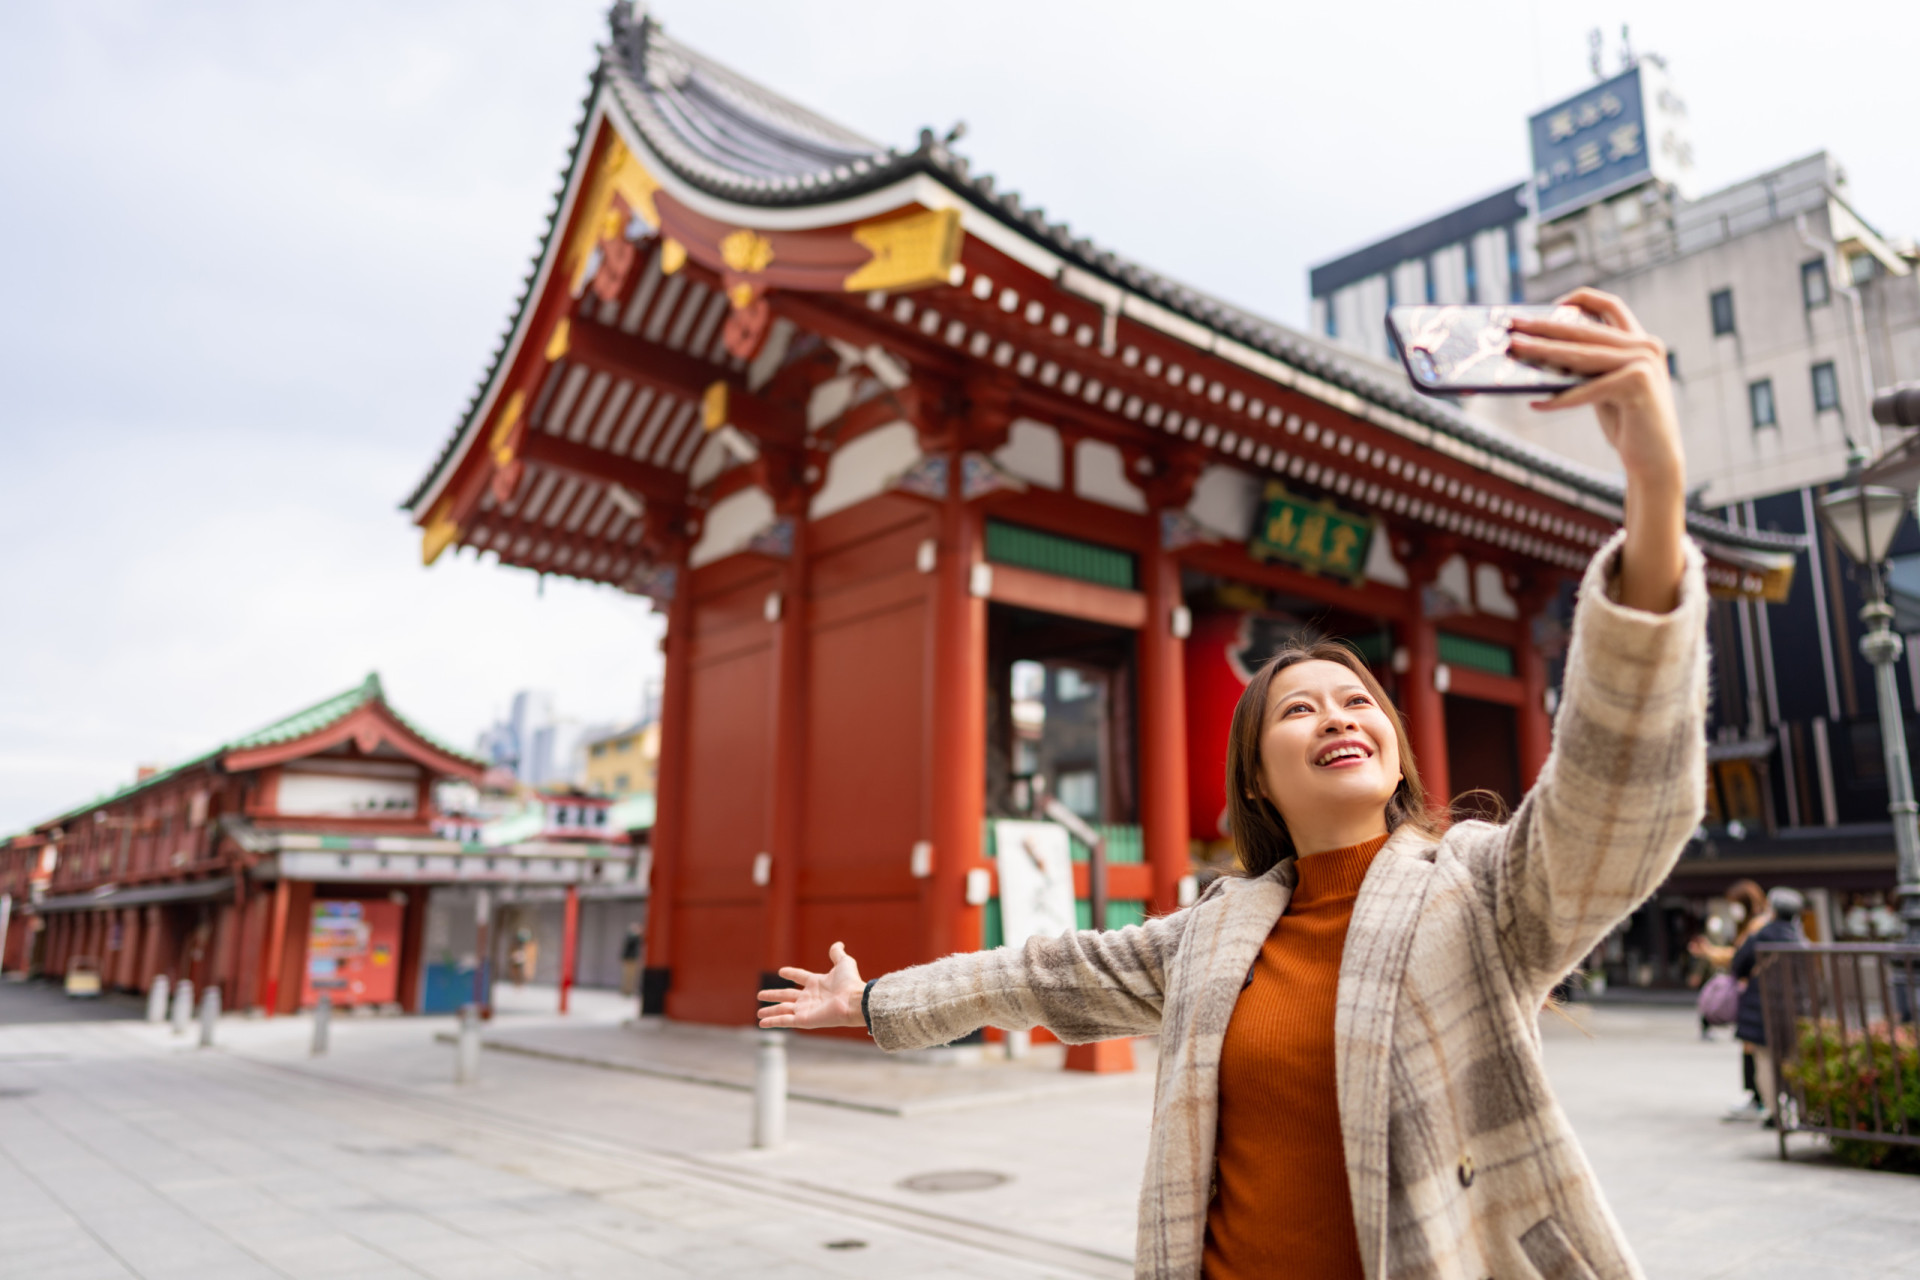 <p>Japan has a 1,000 yen (US$9.25) fee, paid by international visitors as they leave the country.</p><p>You may also like:<a href="https://www.starsinsider.com/n/368808?utm_source=msn.com&utm_medium=display&utm_campaign=referral_description&utm_content=683481en-my"> Normandy beyond the beaches</a></p>